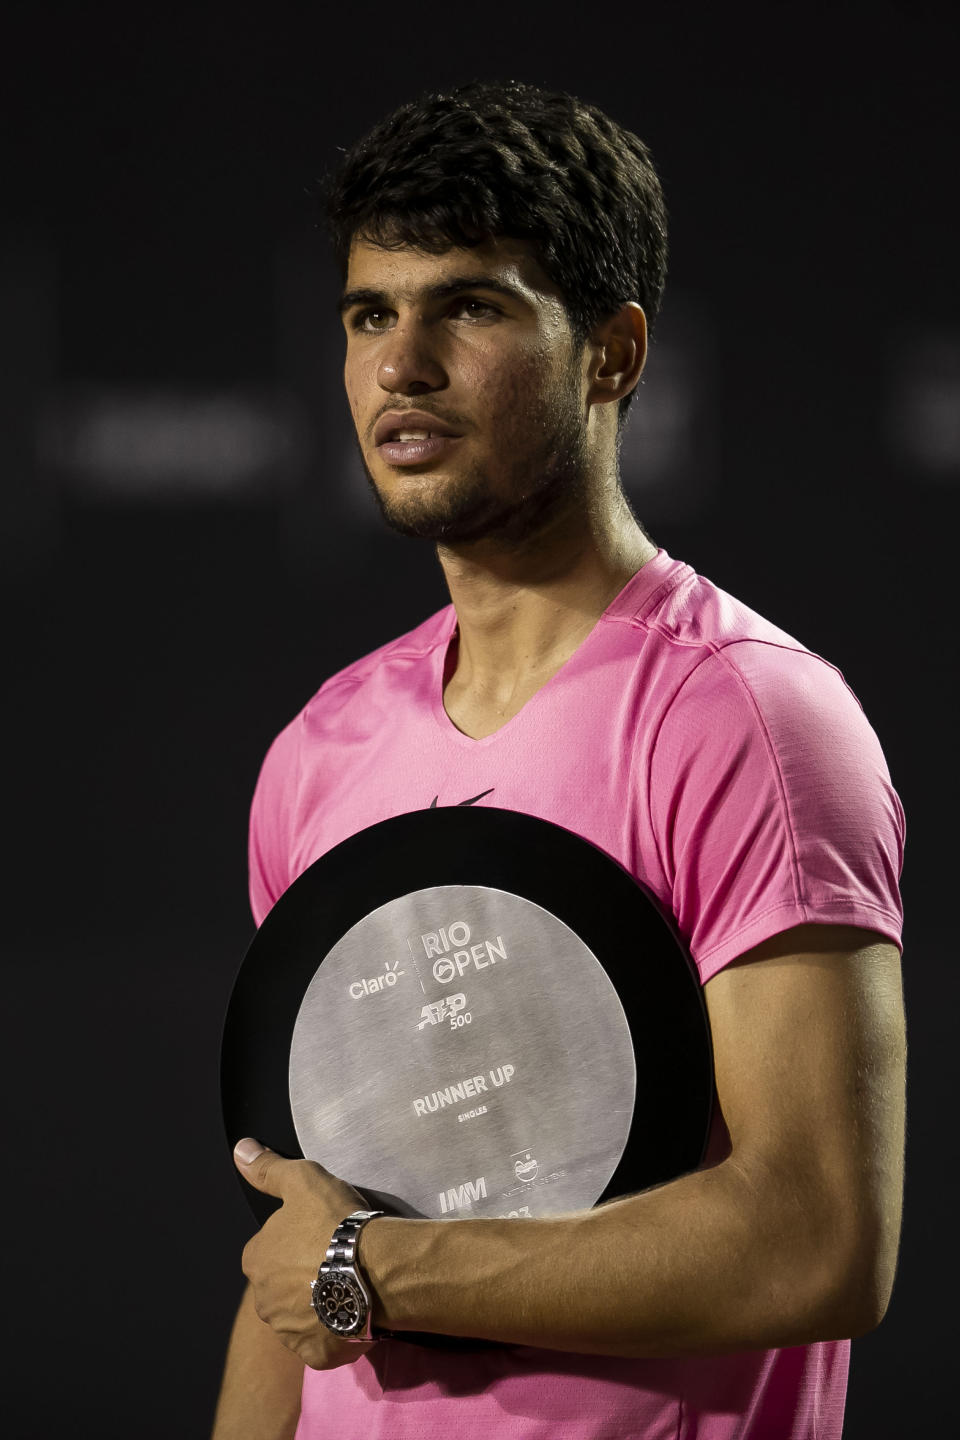 Carlos Alcaraz of Spain holds the second place trophy following the Rio Open Tennis tournament final against Cameron Norrie of the United Kingdom, in Rio de Janeiro, Brazil, Sunday, Feb. 26, 2023. (AP Photo/Bruna Prado)